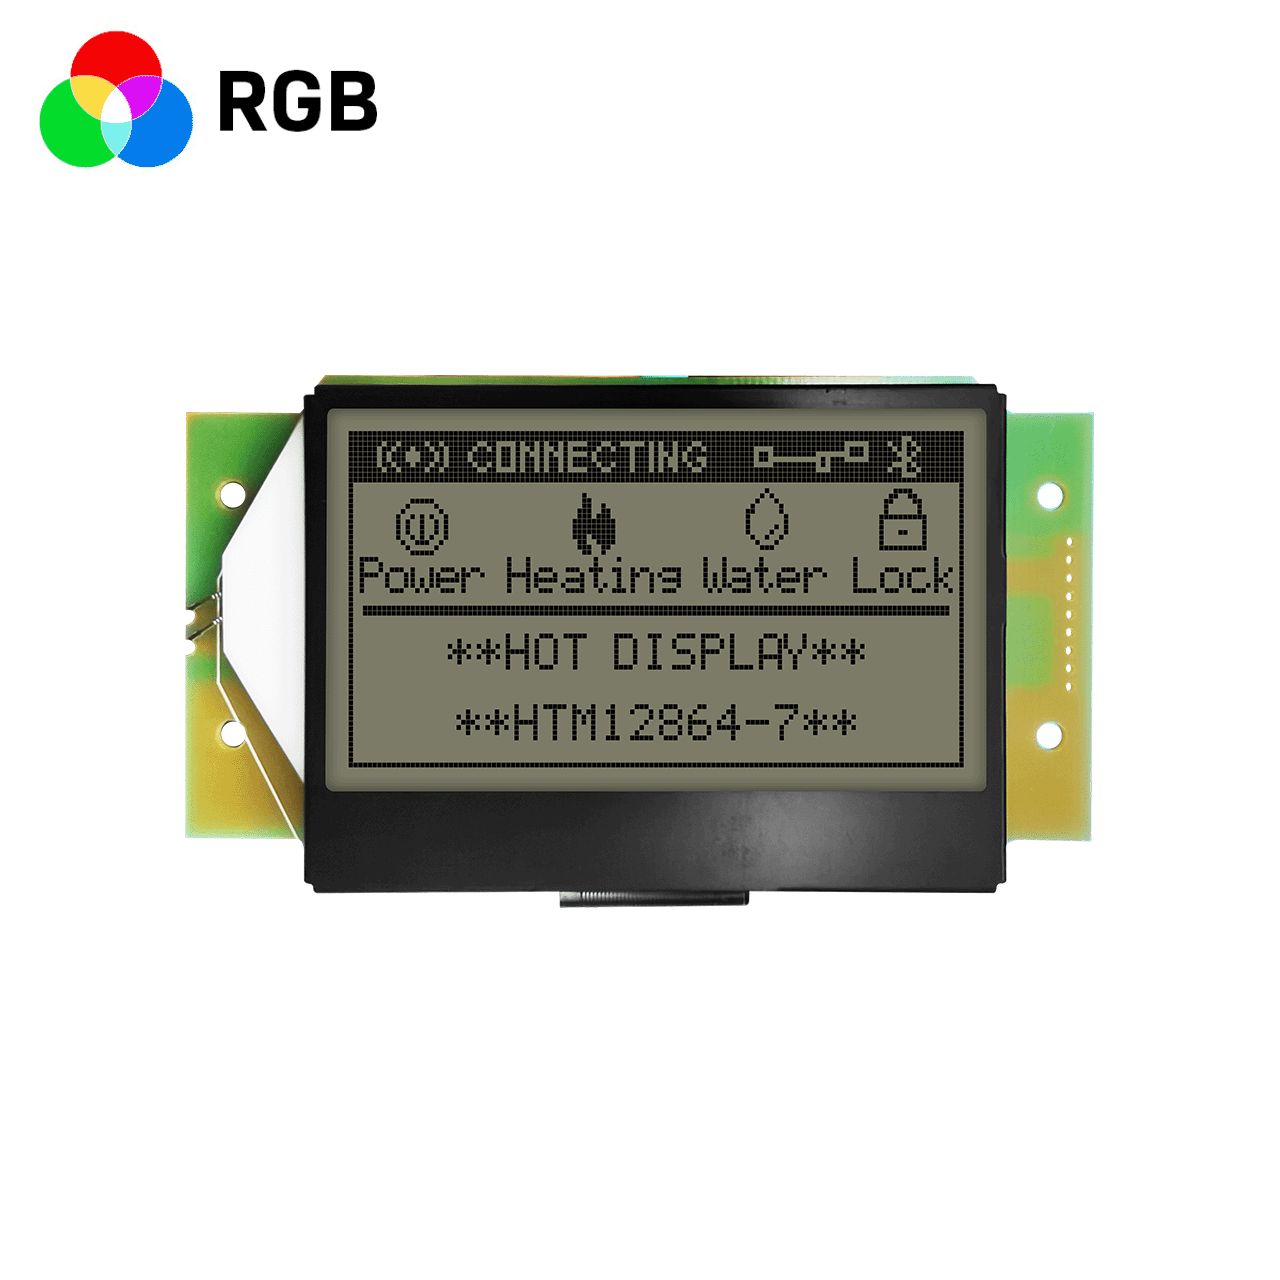 3.0-inch RGB red, green and blue graphic LCD module | 128x64 graphic display LCD module | FSTN+ yellow-green backlight | 5.0V | ST7565R controller | Fully transparent polarizer